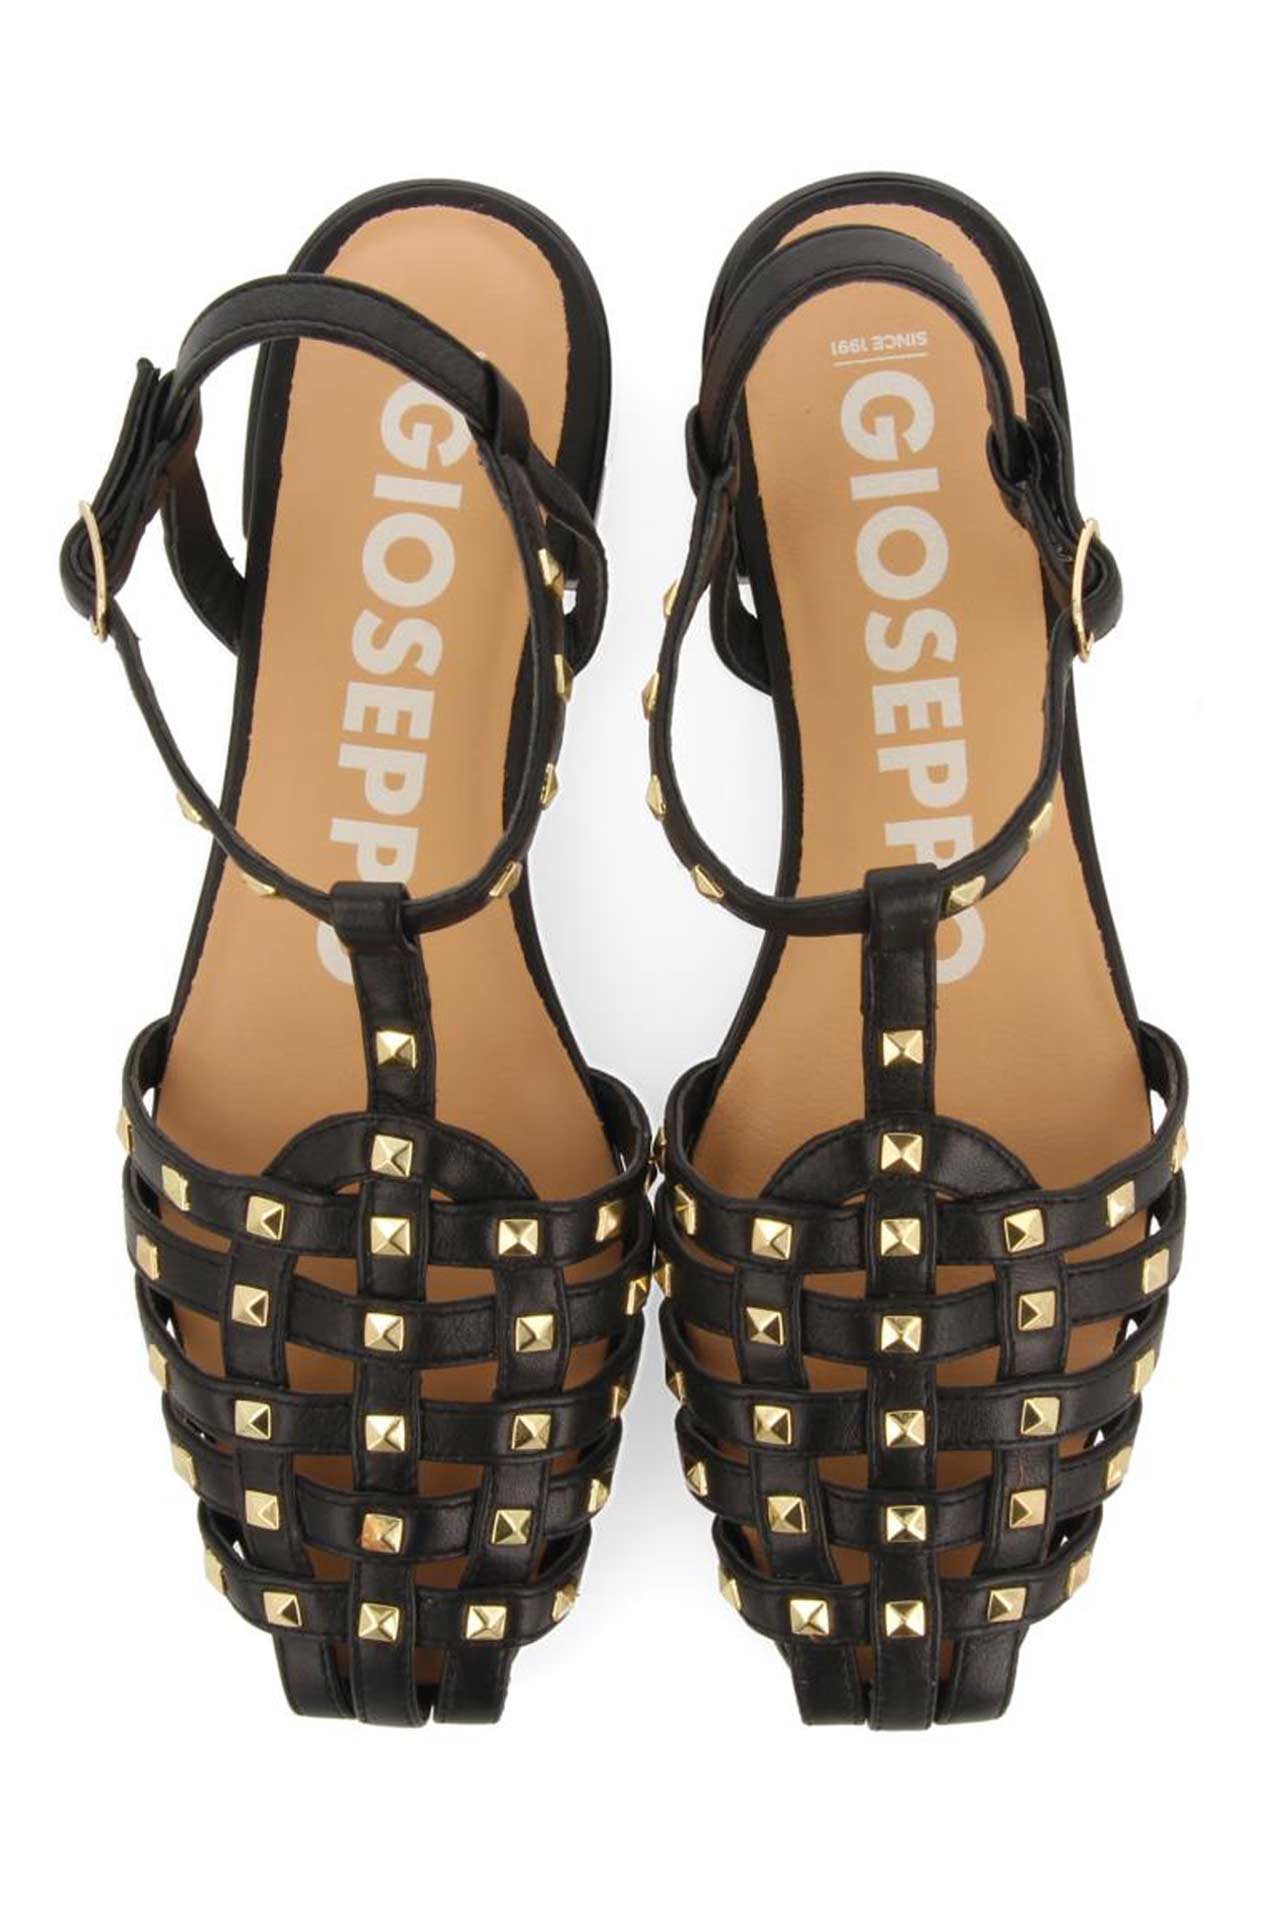 GIOSEPPO CANBY BLACK LEATHER CRAB-STYLE SANDALS WITH STUDS